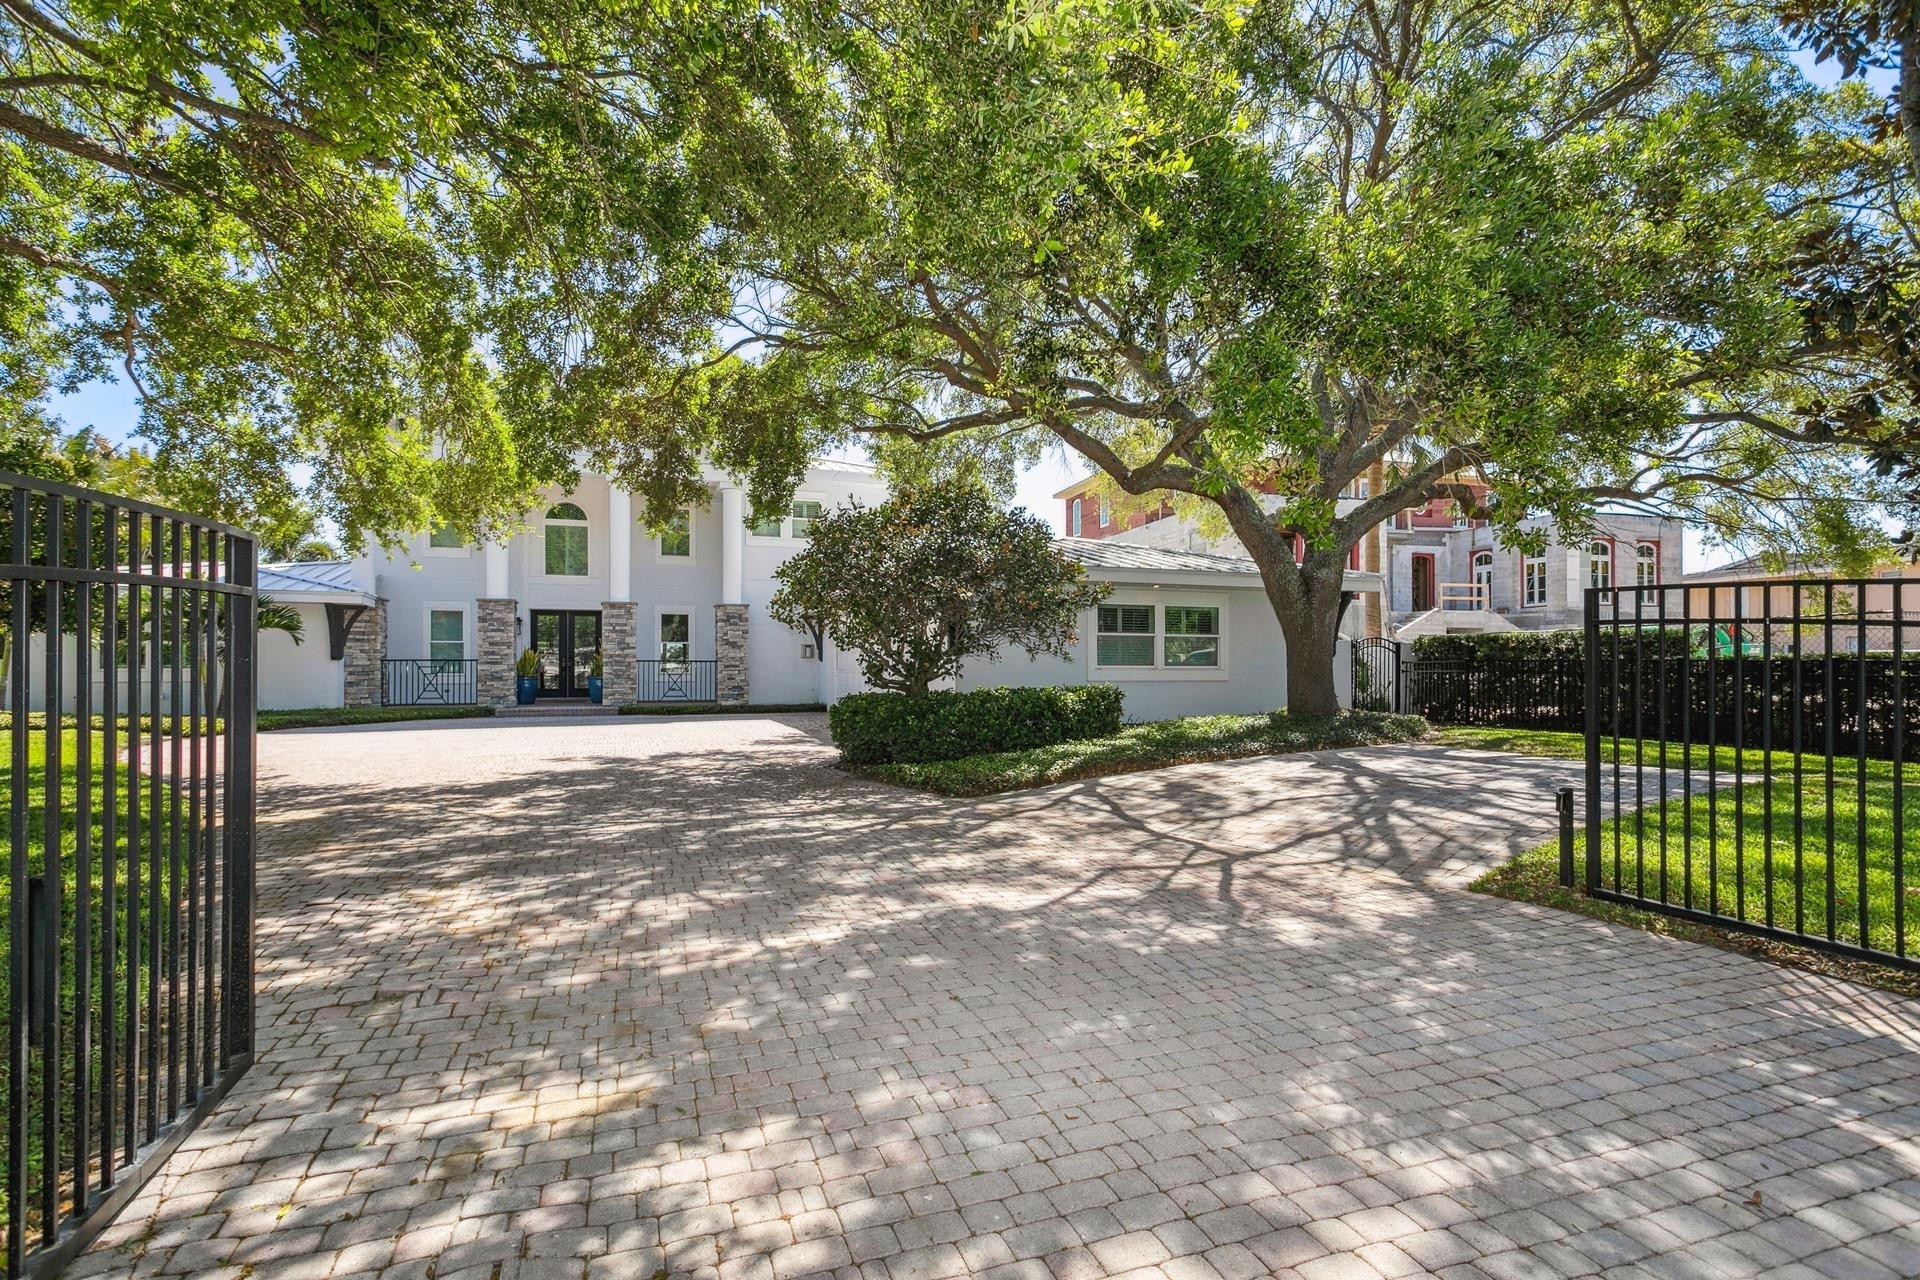 Property at Snell Isle, St. Petersburg, FL 33704